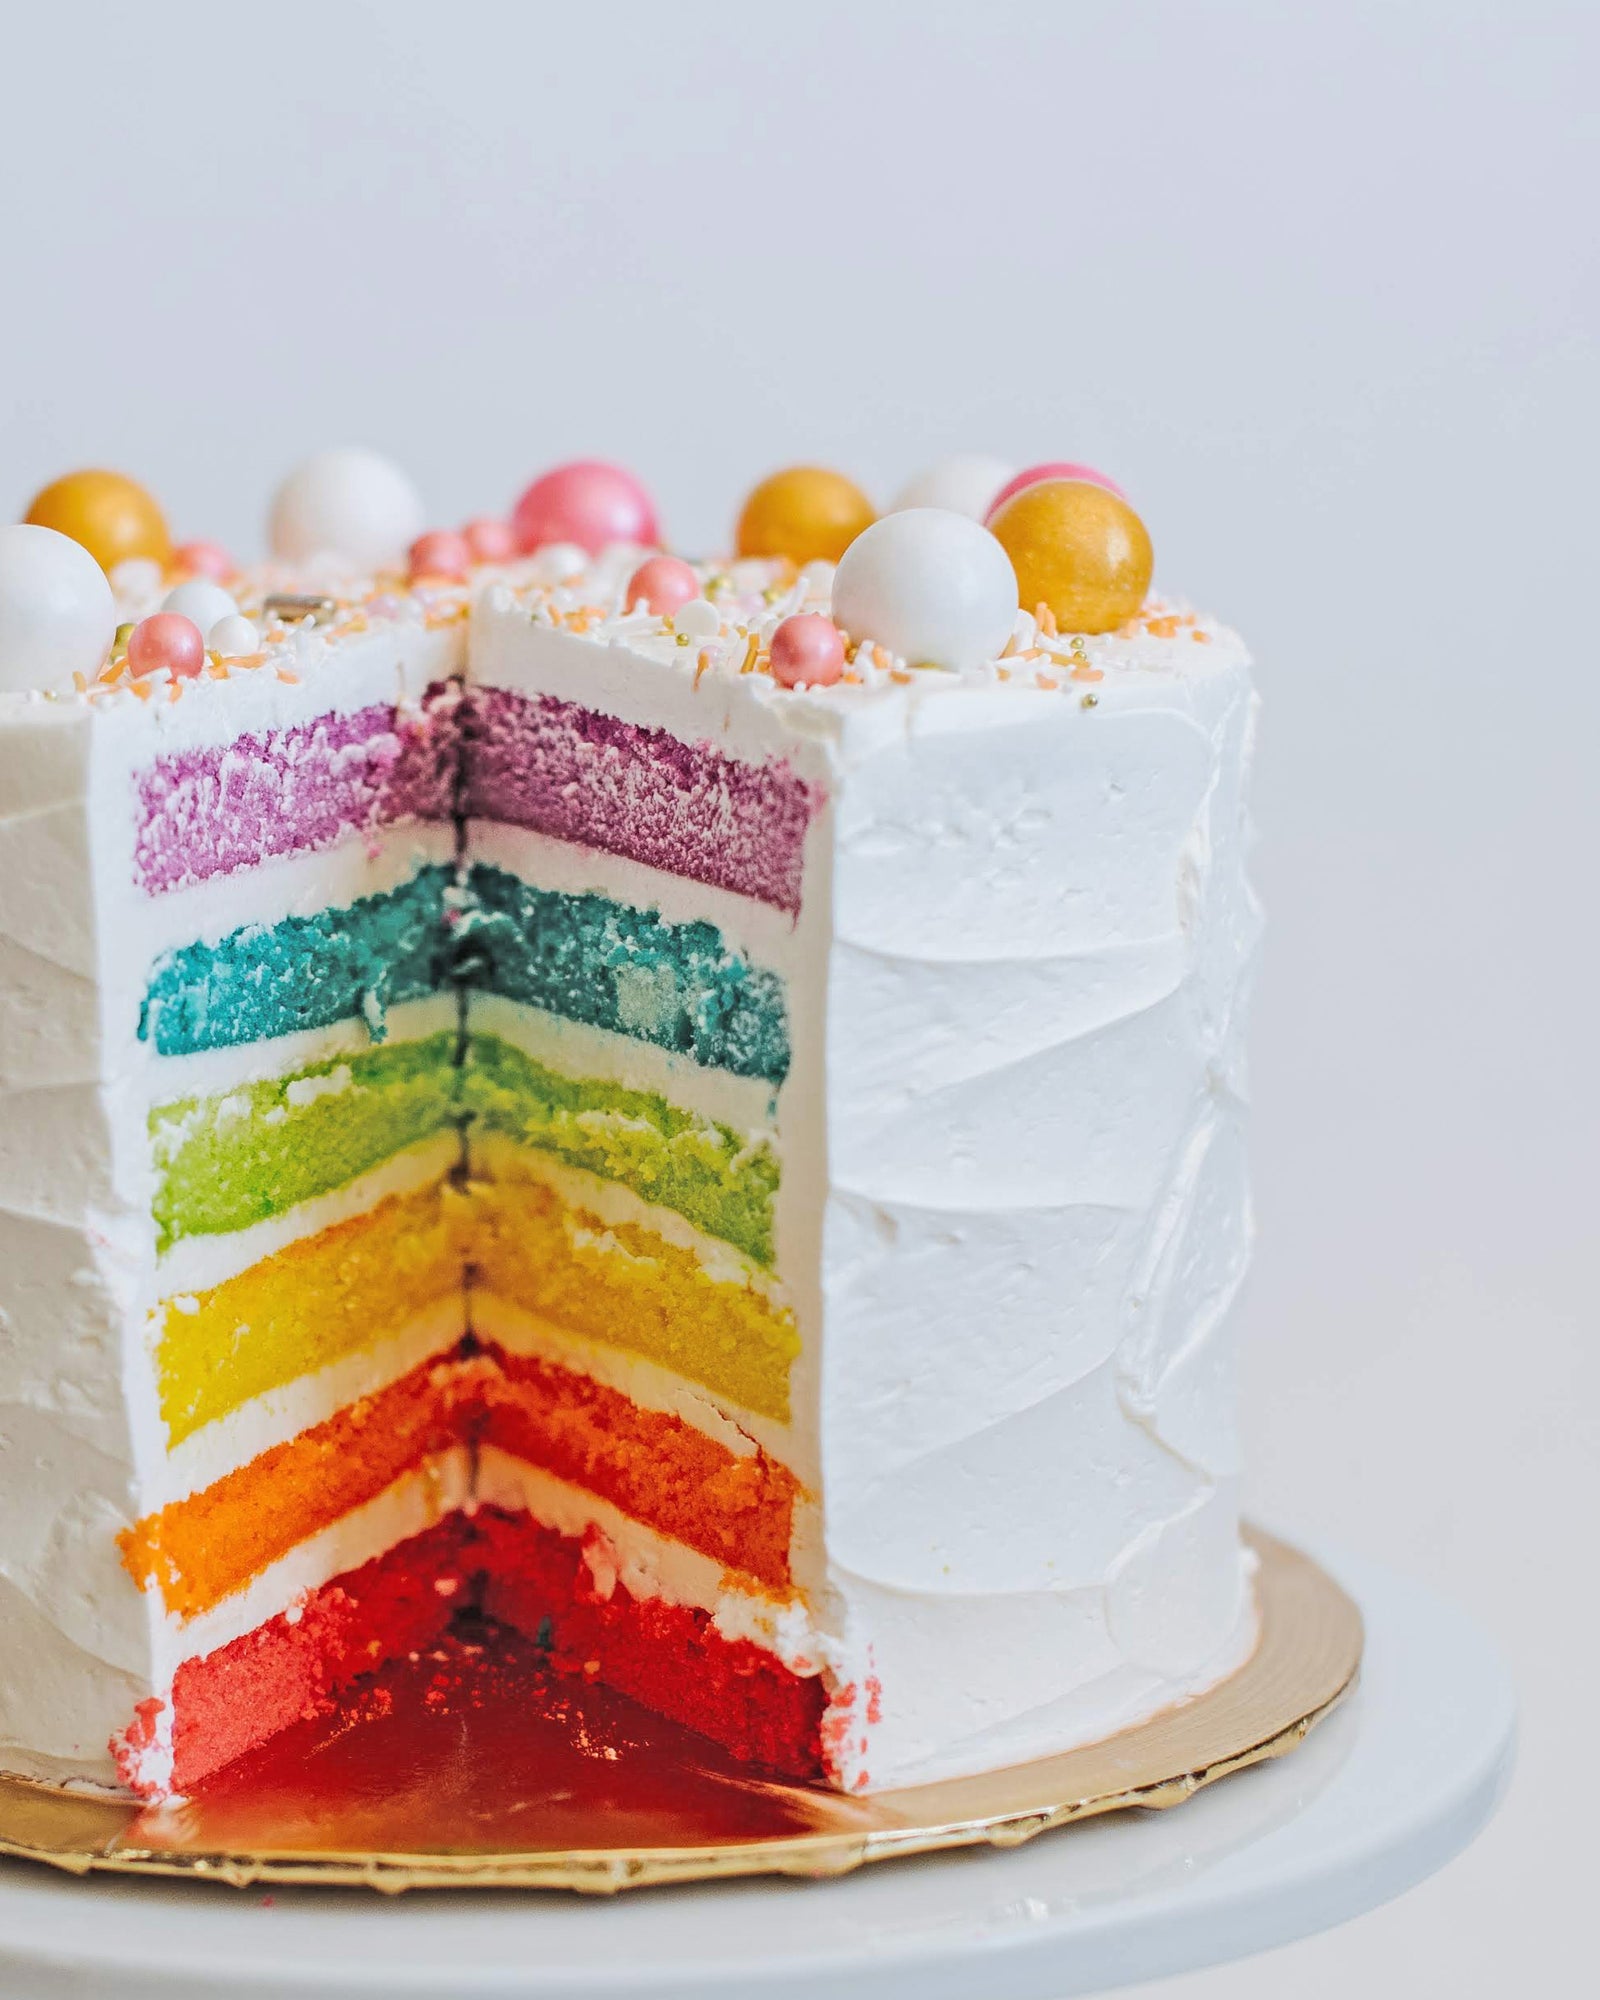 How to Build a Rainbow Layer Cake | Food Network - YouTube